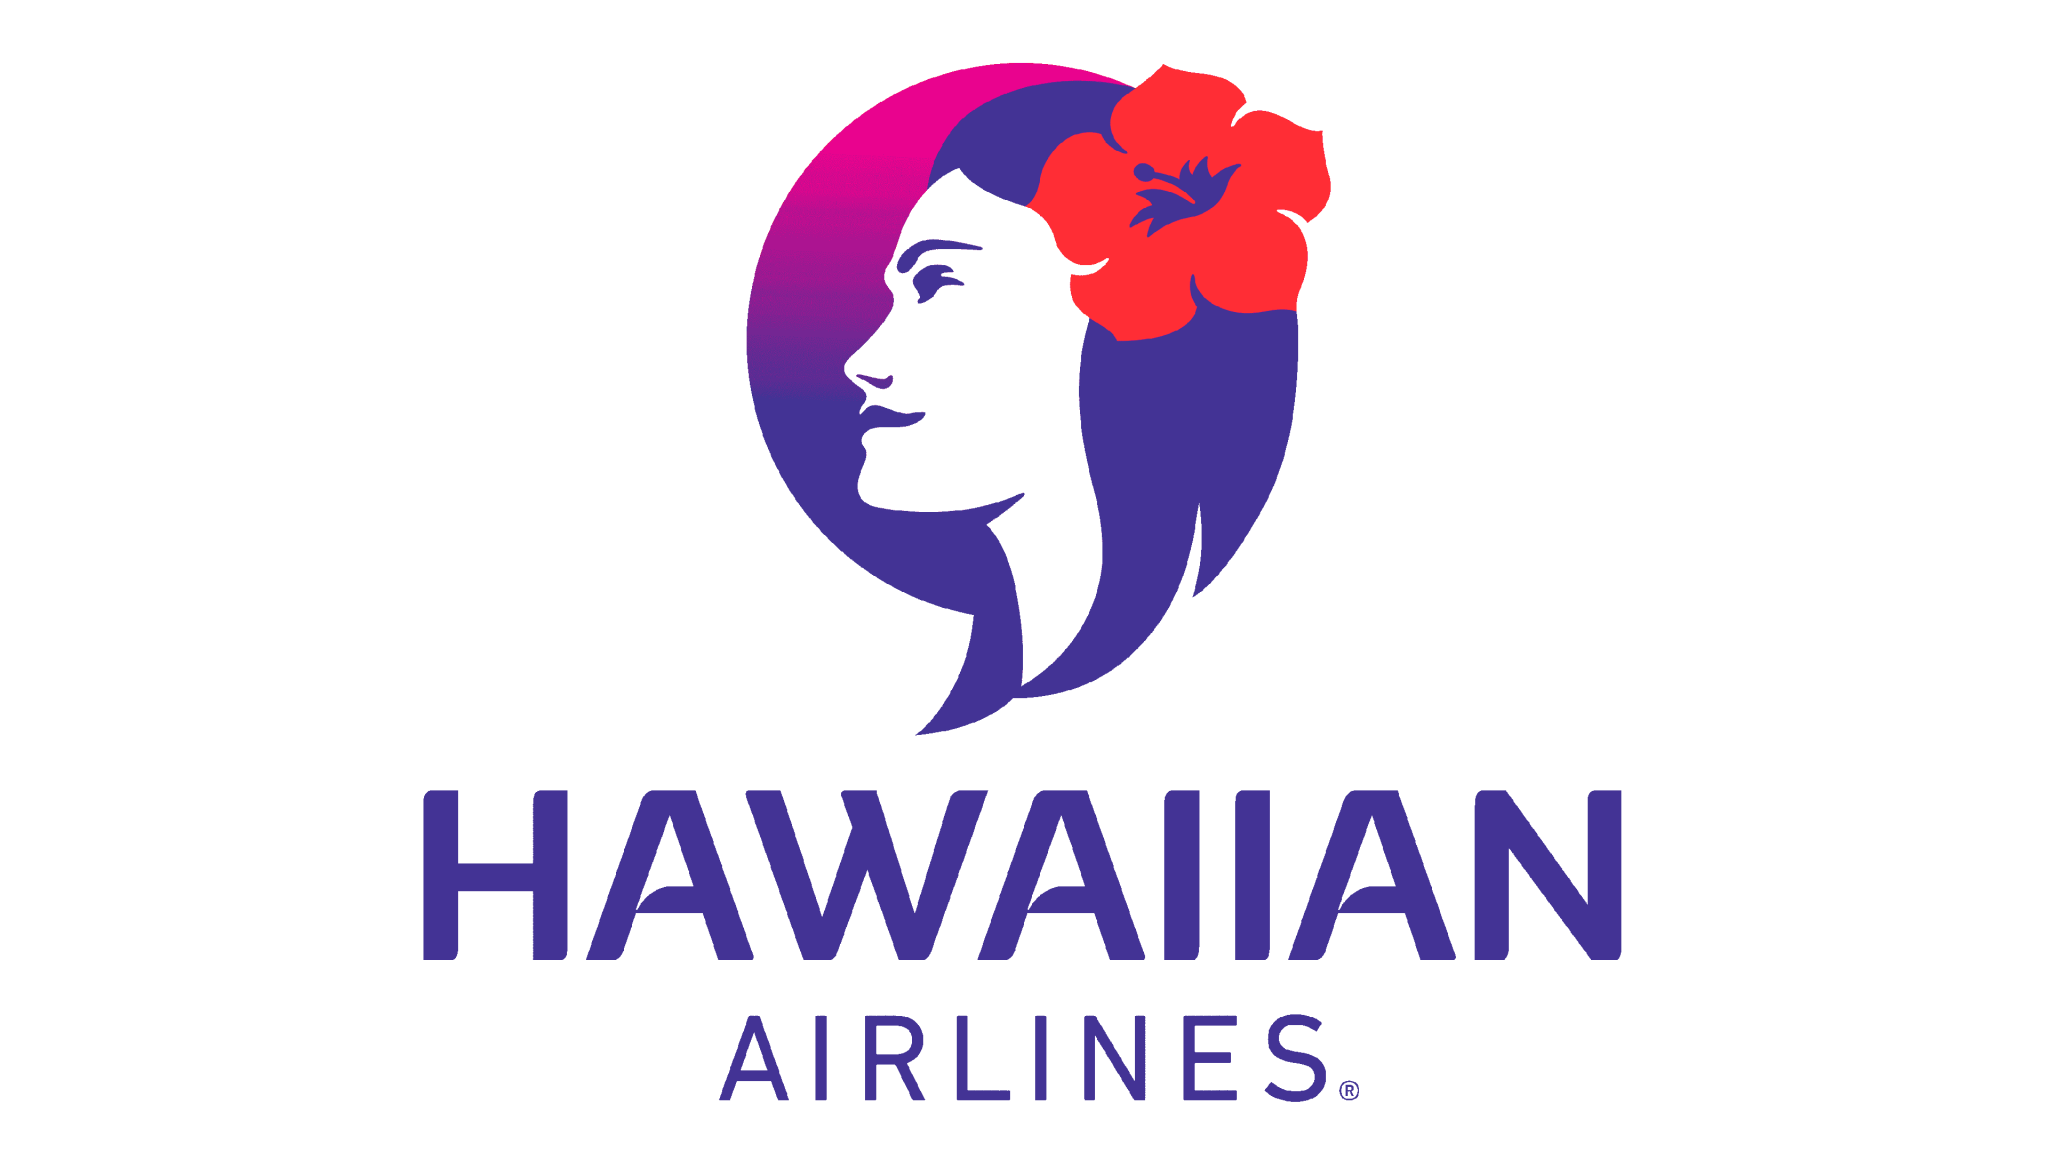 Hawaiian Airlines logo download in SVG vector format or in PNG format